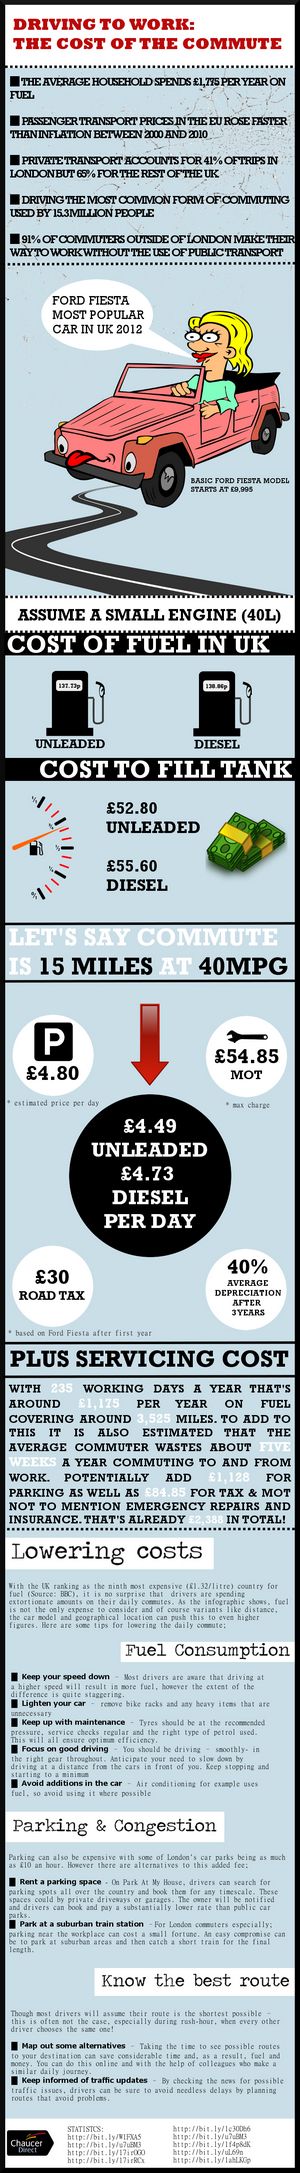 Driving To Work - The Cost Of The Commute